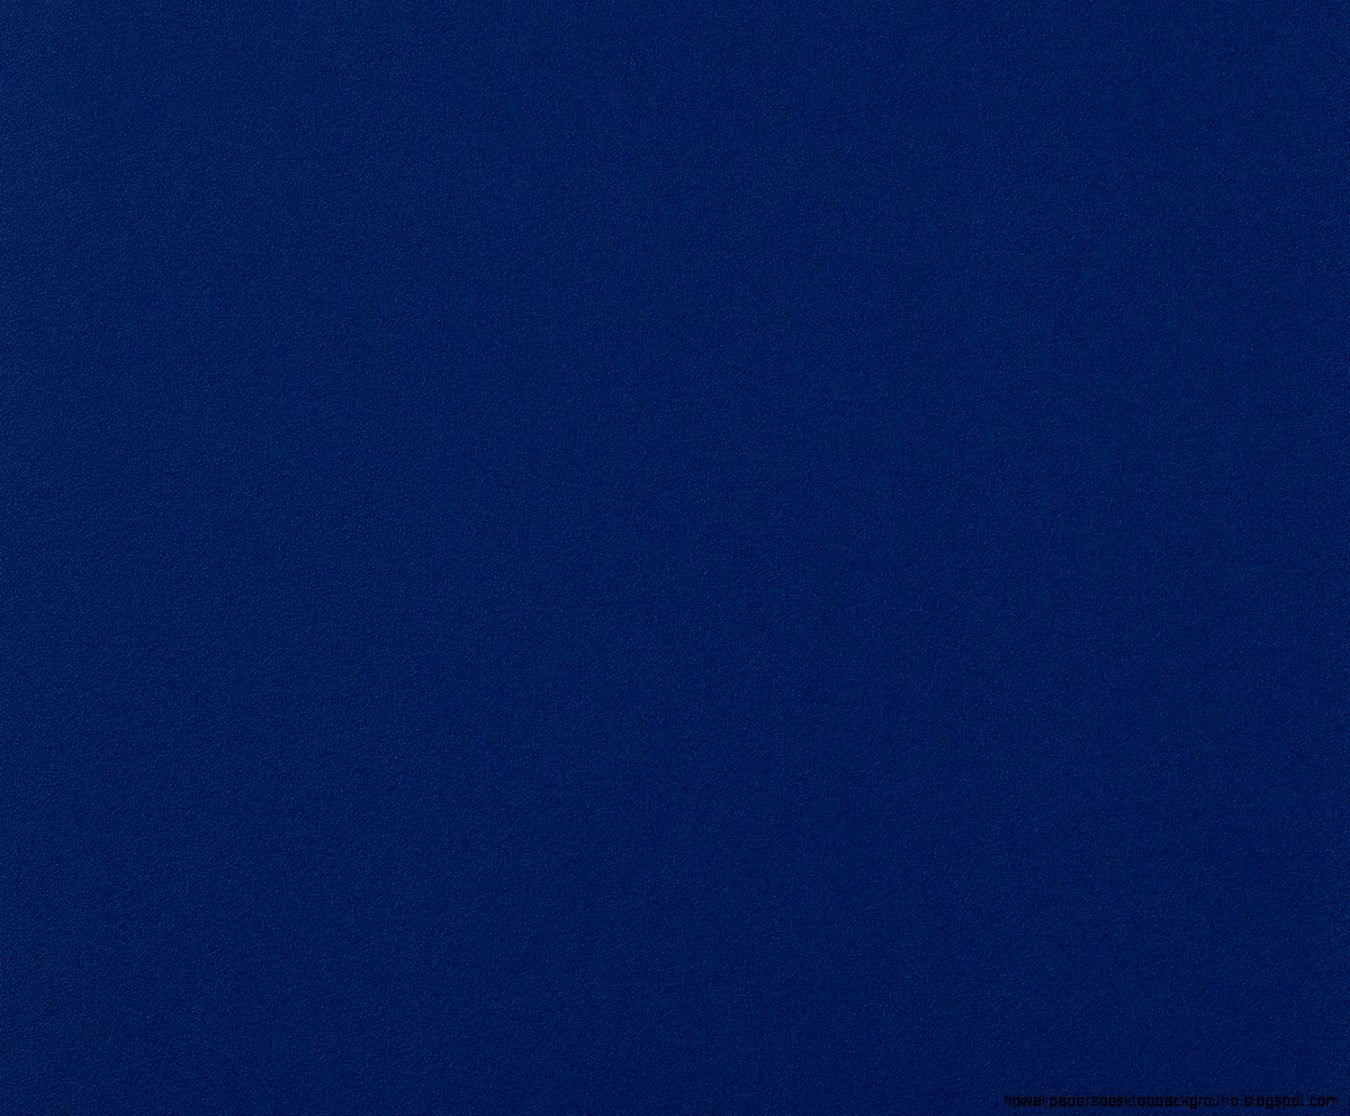 Plain Blue Wallpaper For Android | HD Wallpapers Desktop Background